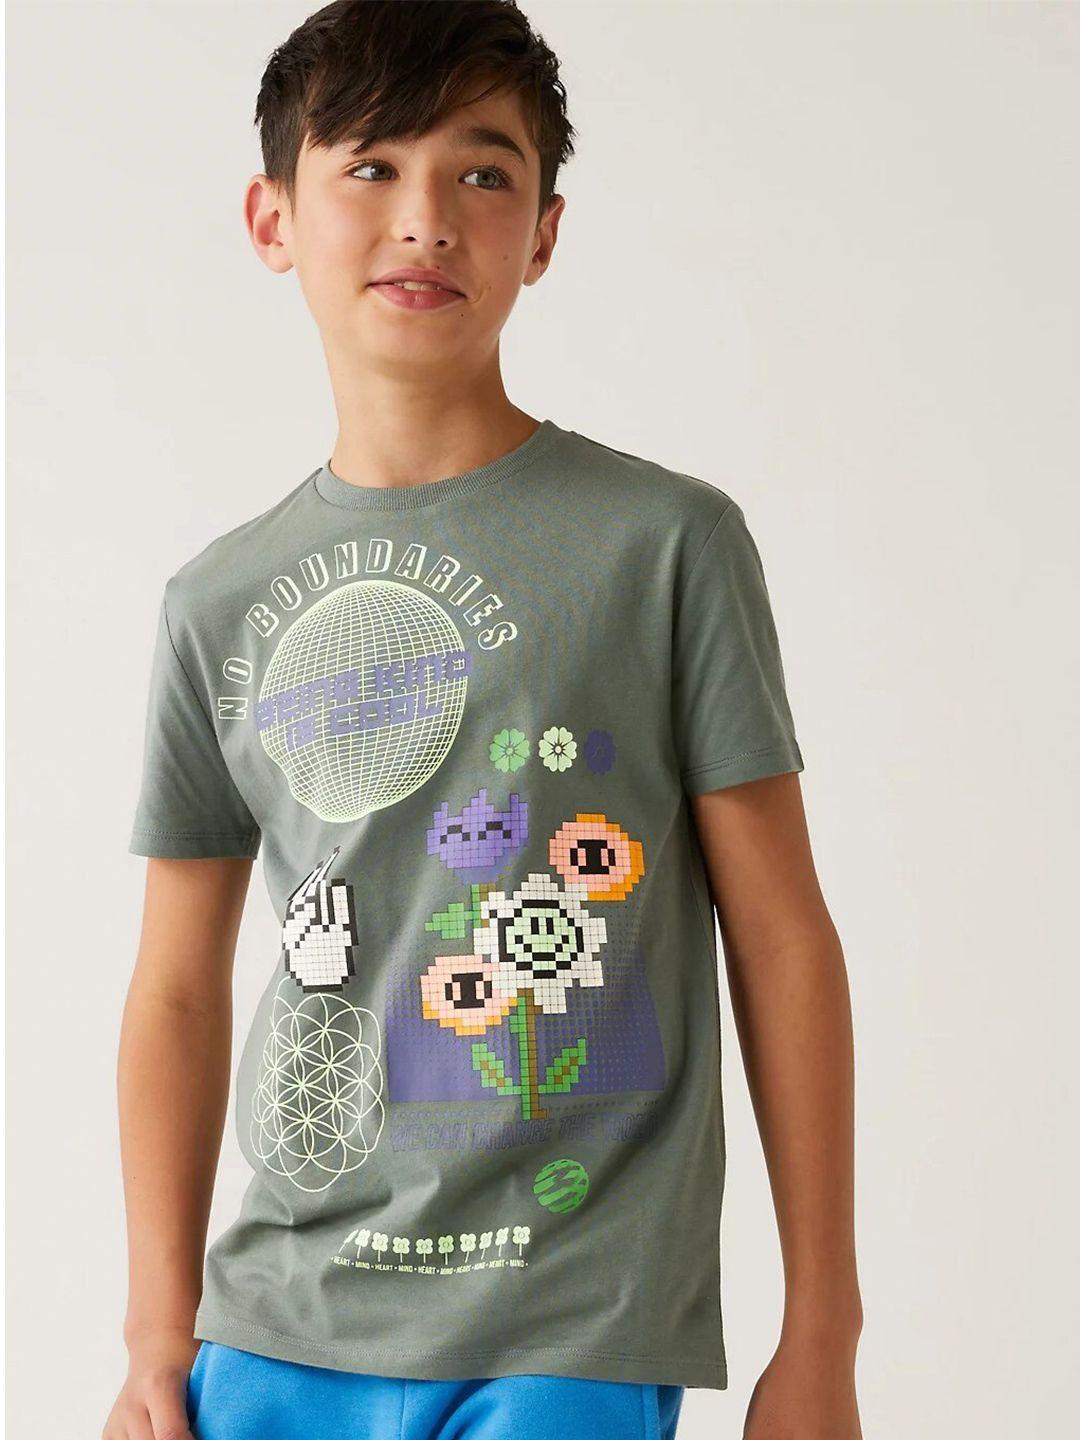 marks & spencer boys round neck printed pure cotton t-shirt